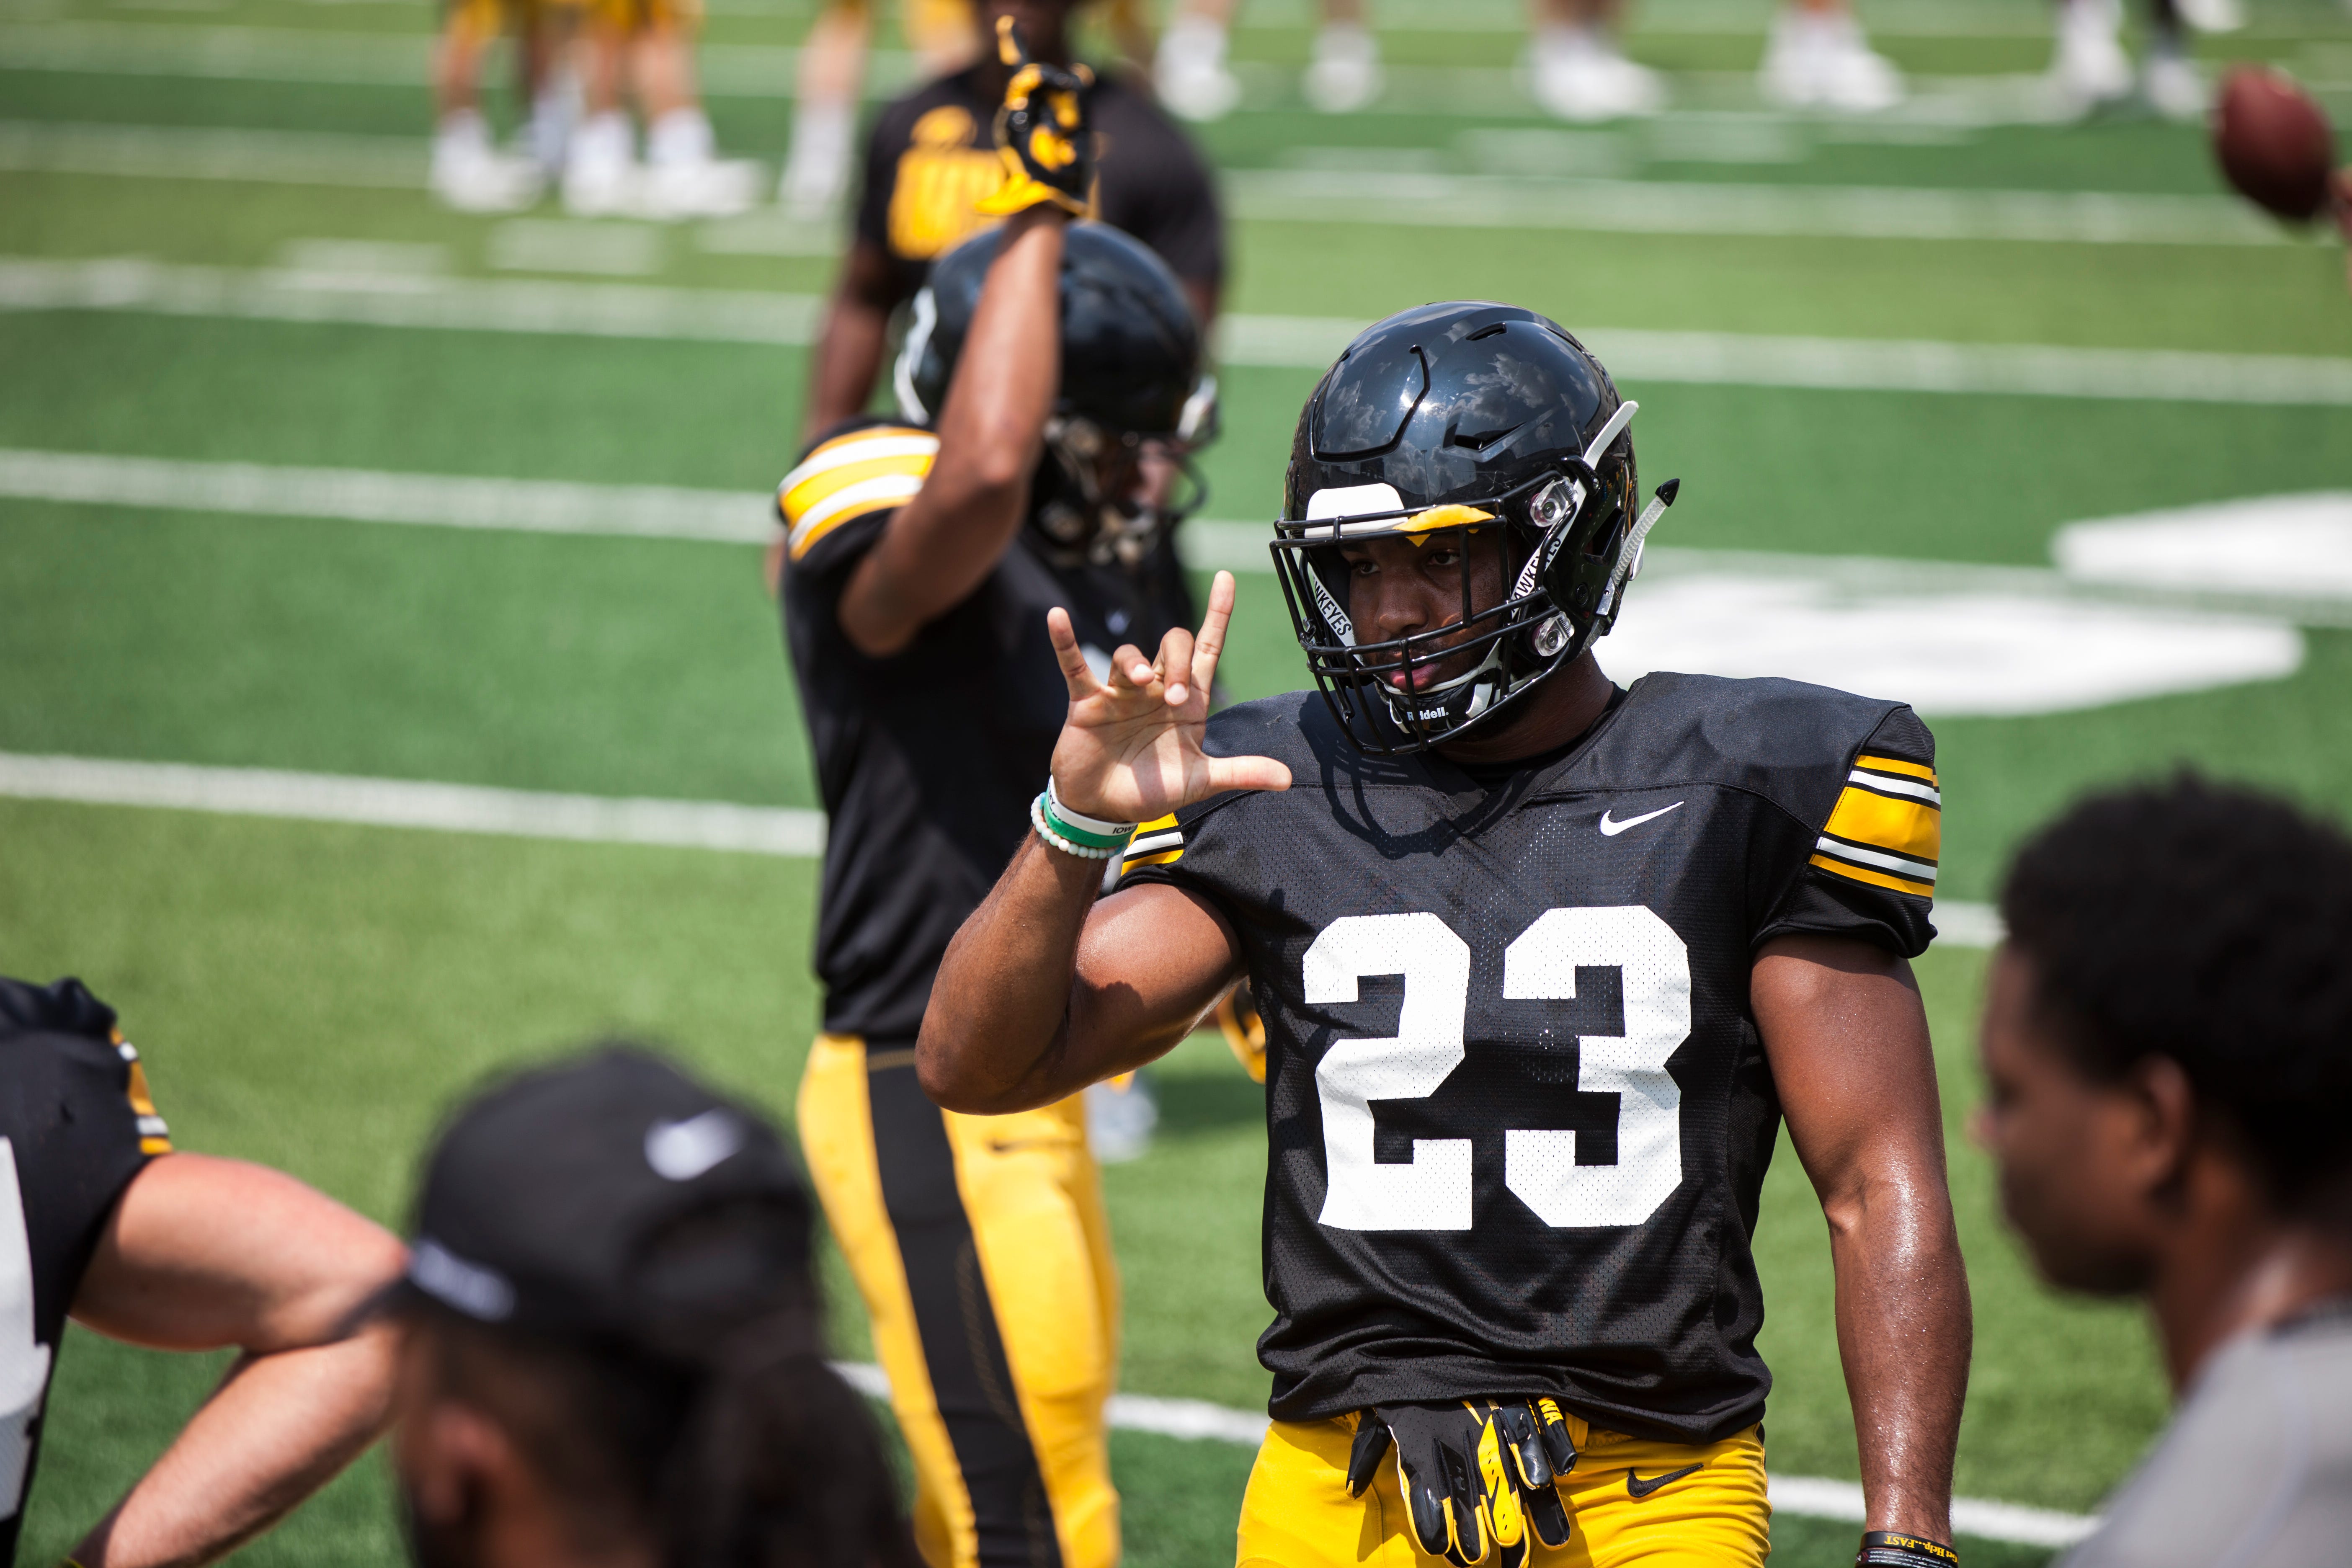 Iowa wide receiver Dominique Dafney gestures during a Kids Day practice on Saturday, Aug. 11, 2018, at Kinnick Stadium in Iowa City.